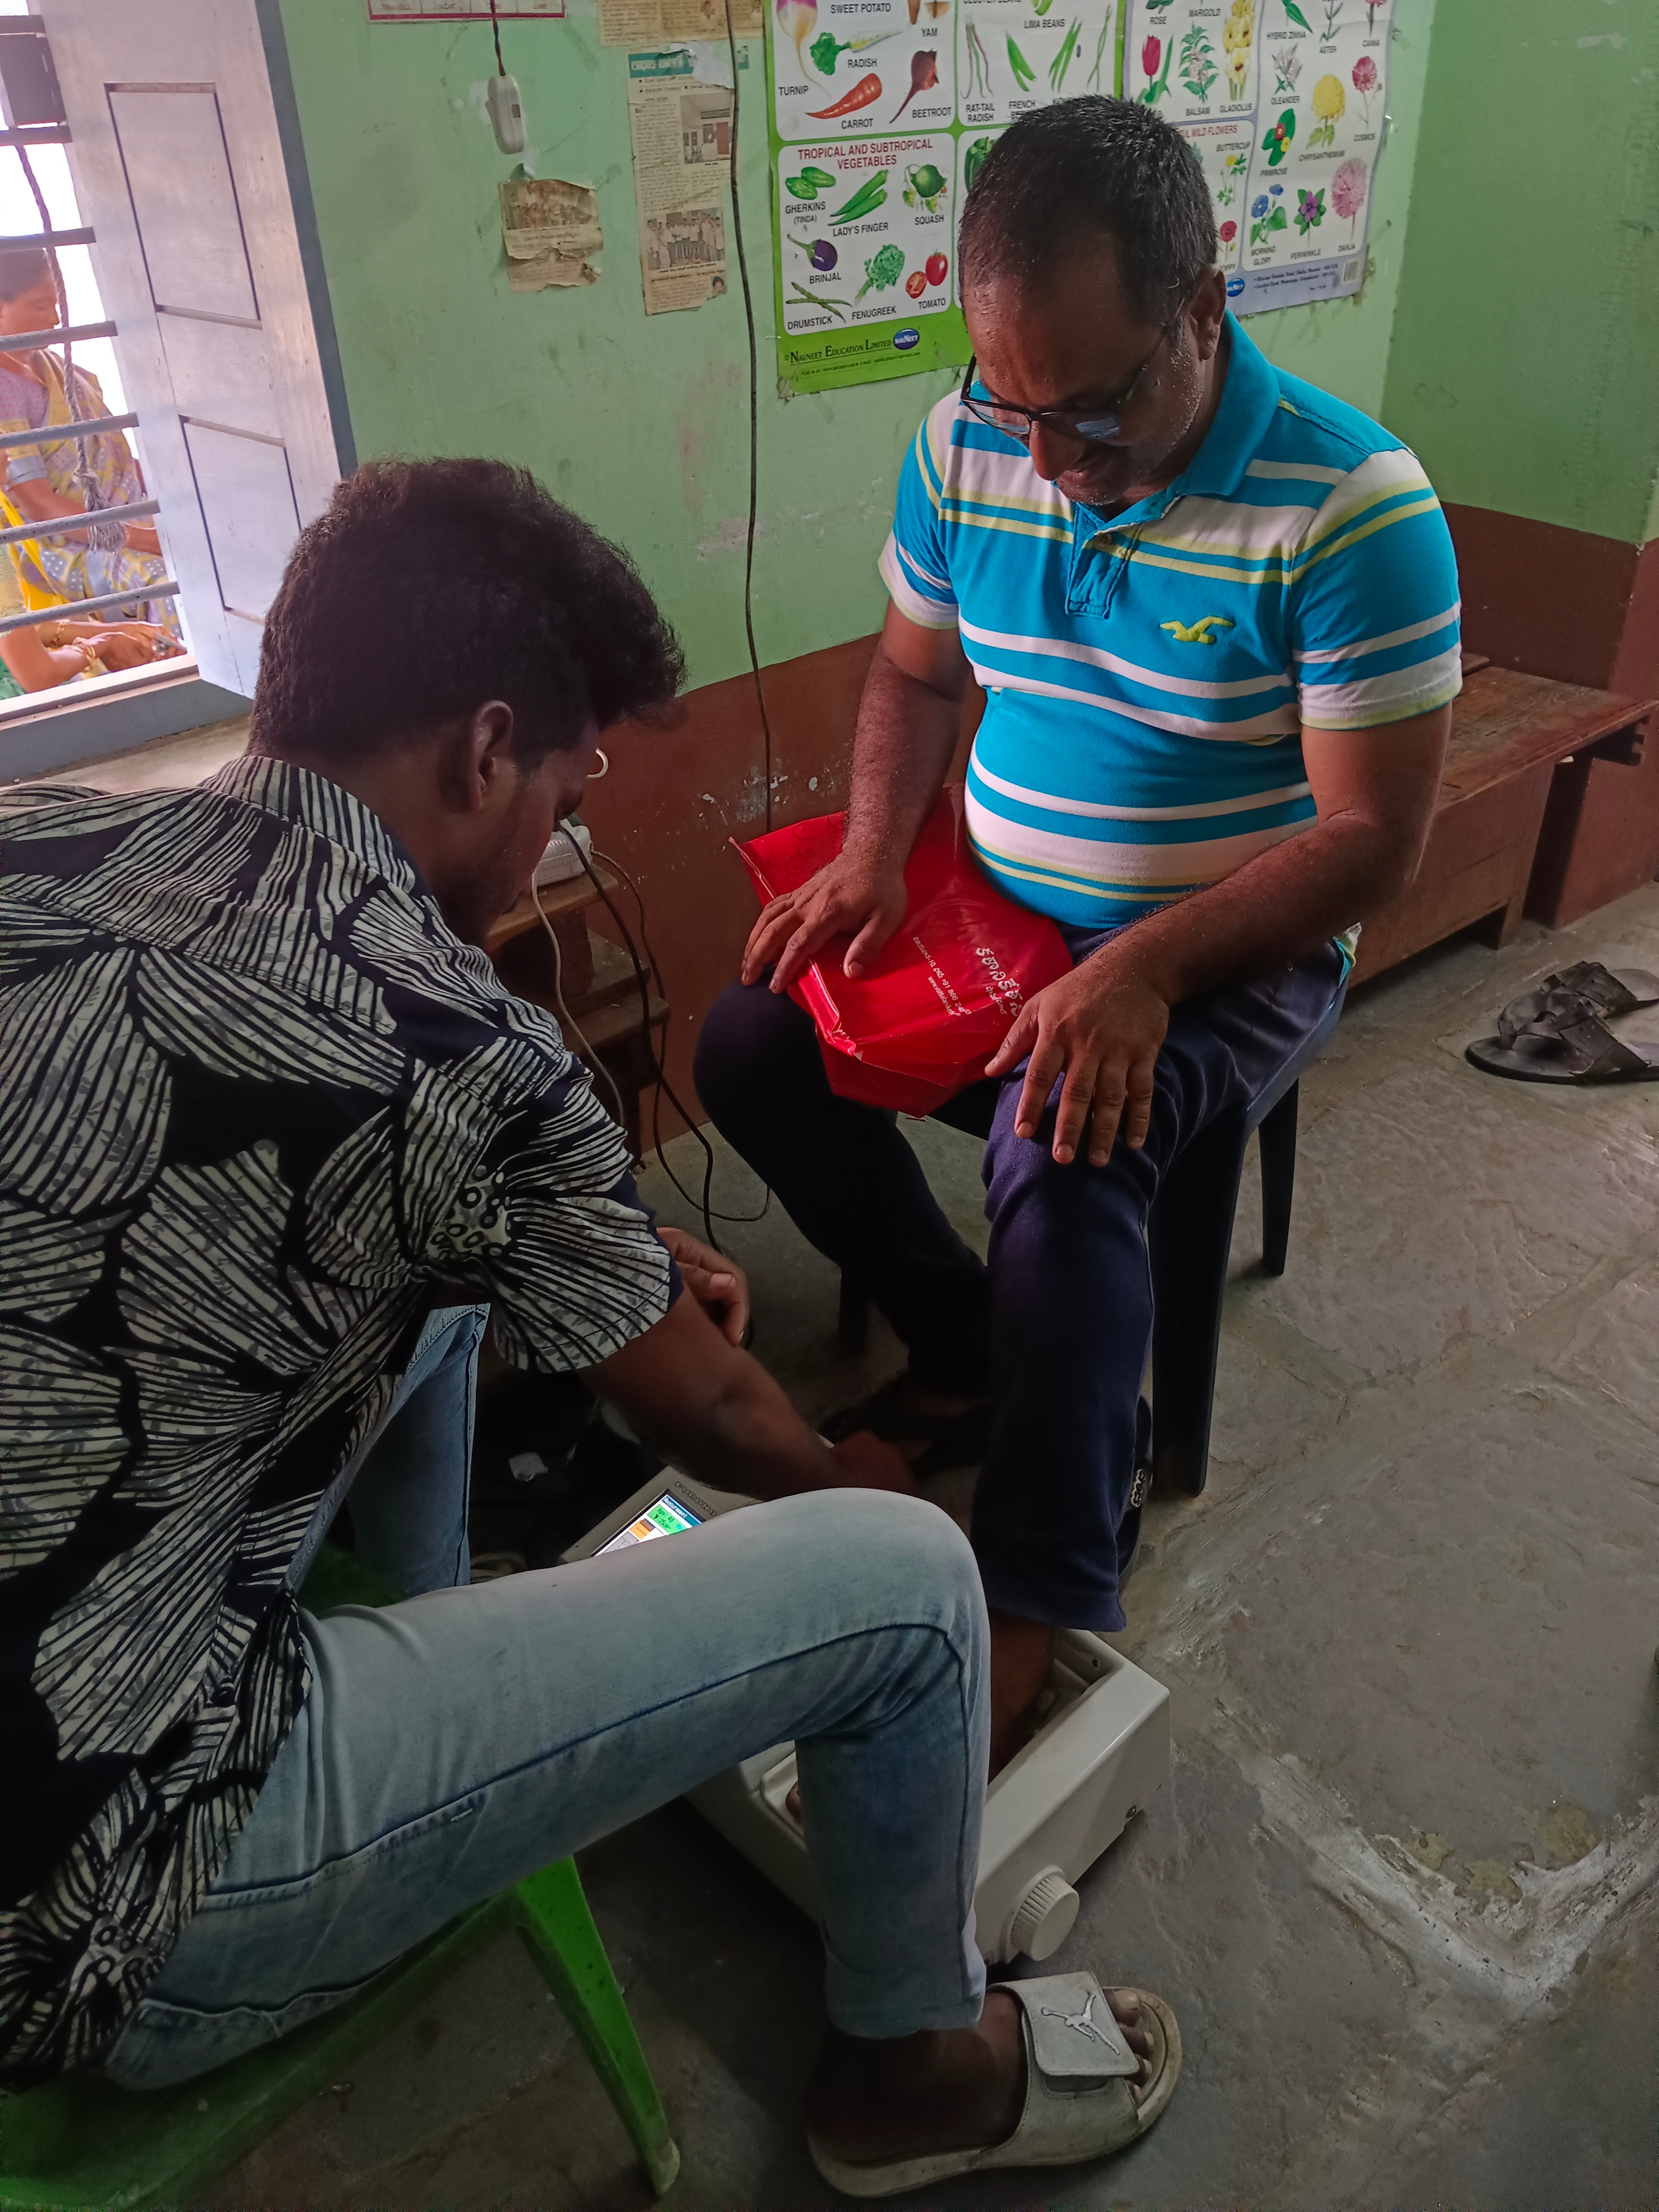 Medical professional testing orthopaedic health of a patient via foot examination.